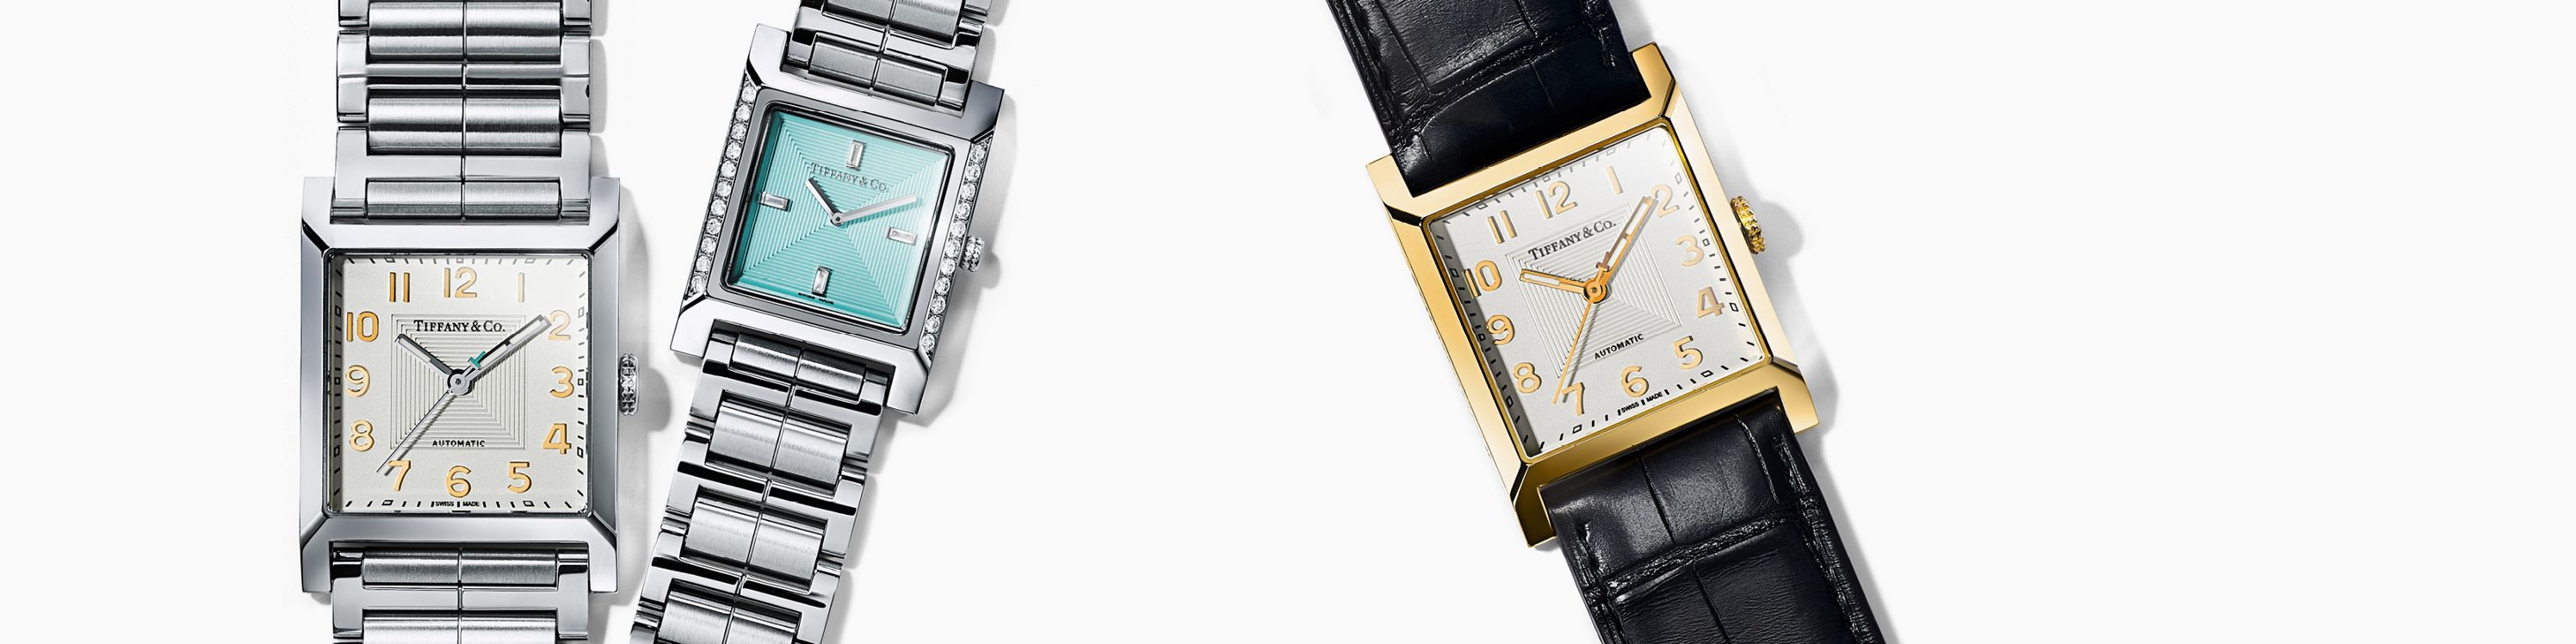 Men's Watches: Swiss-made Luxury Watches | Tiffany & Co.